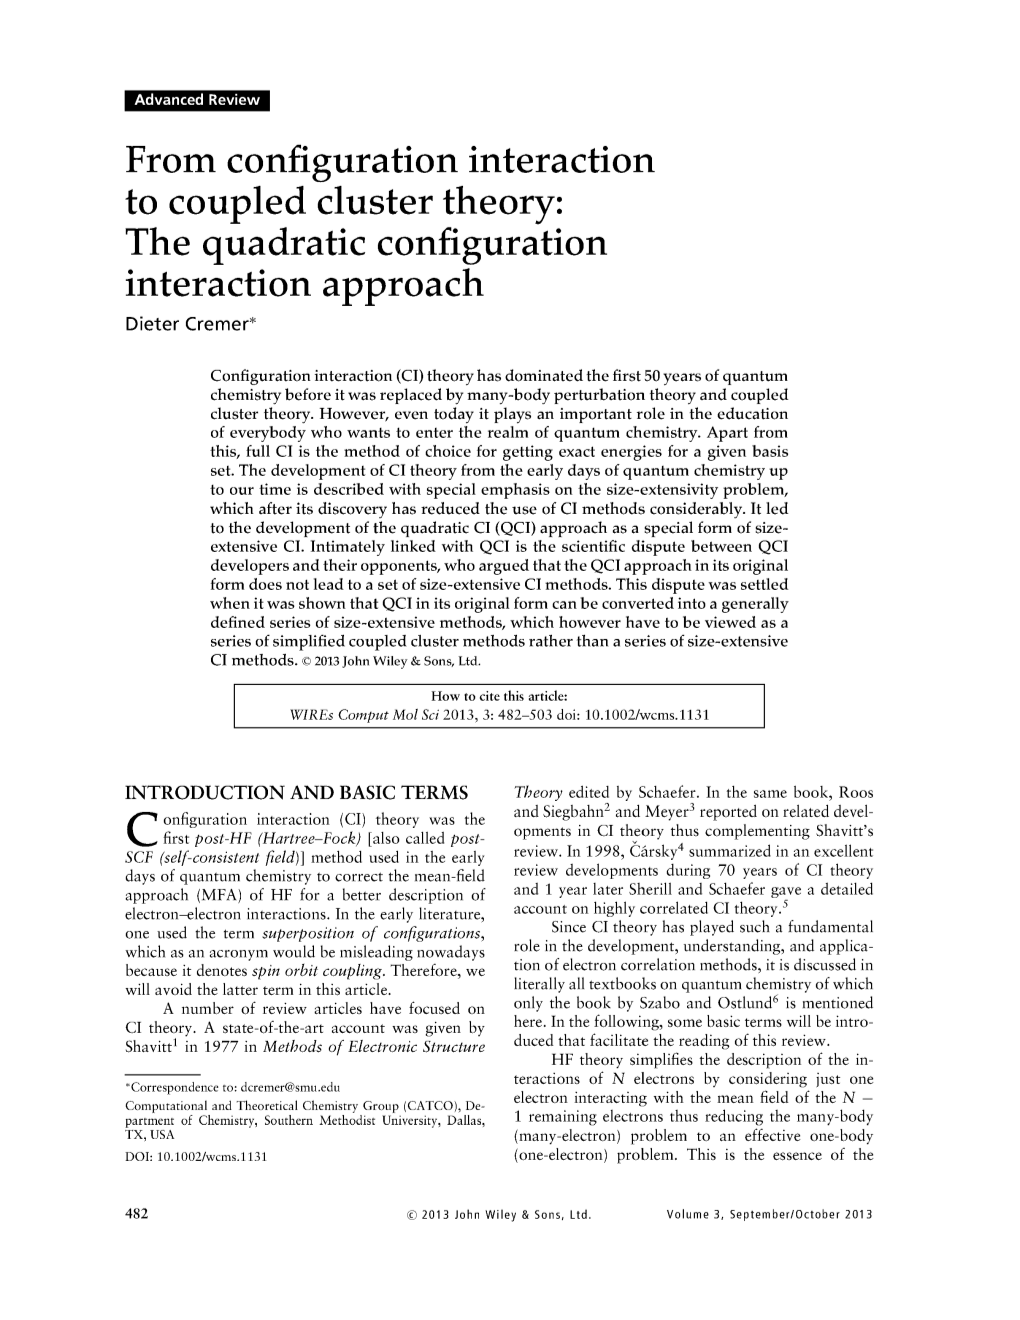 From Configuration Interaction to Coupled Cluster Theory: the Quadratic Configuration Interaction Approach Dieter Cremer*